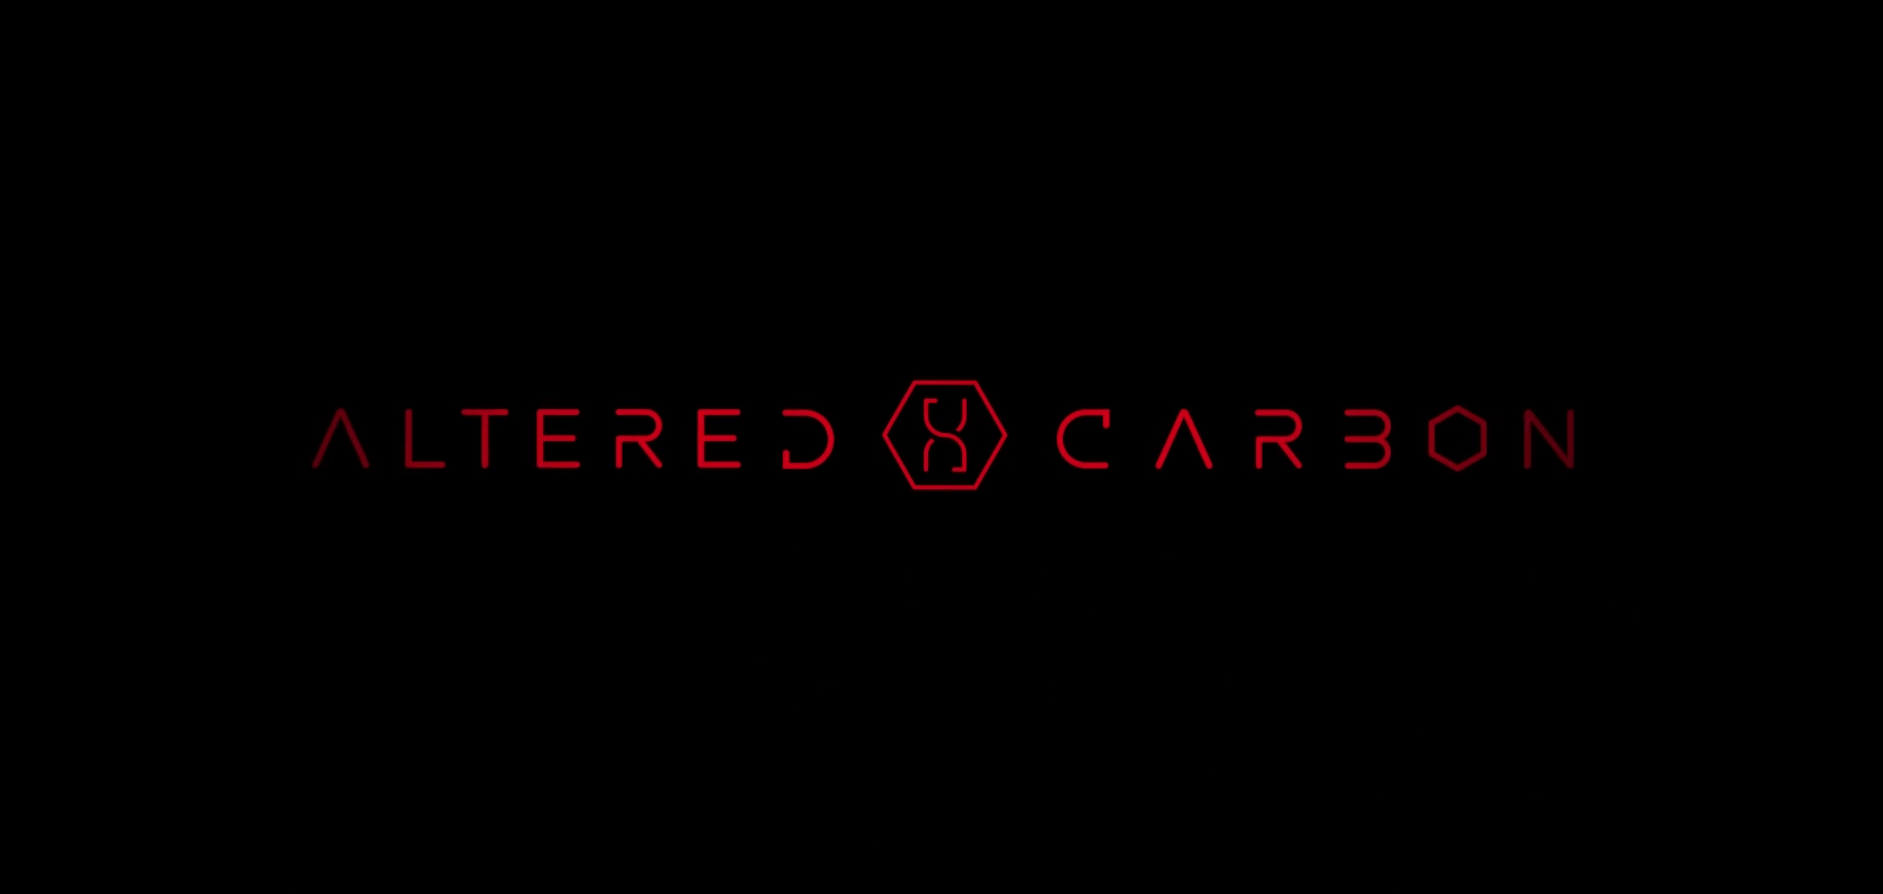 Altered Carbon (TV series)